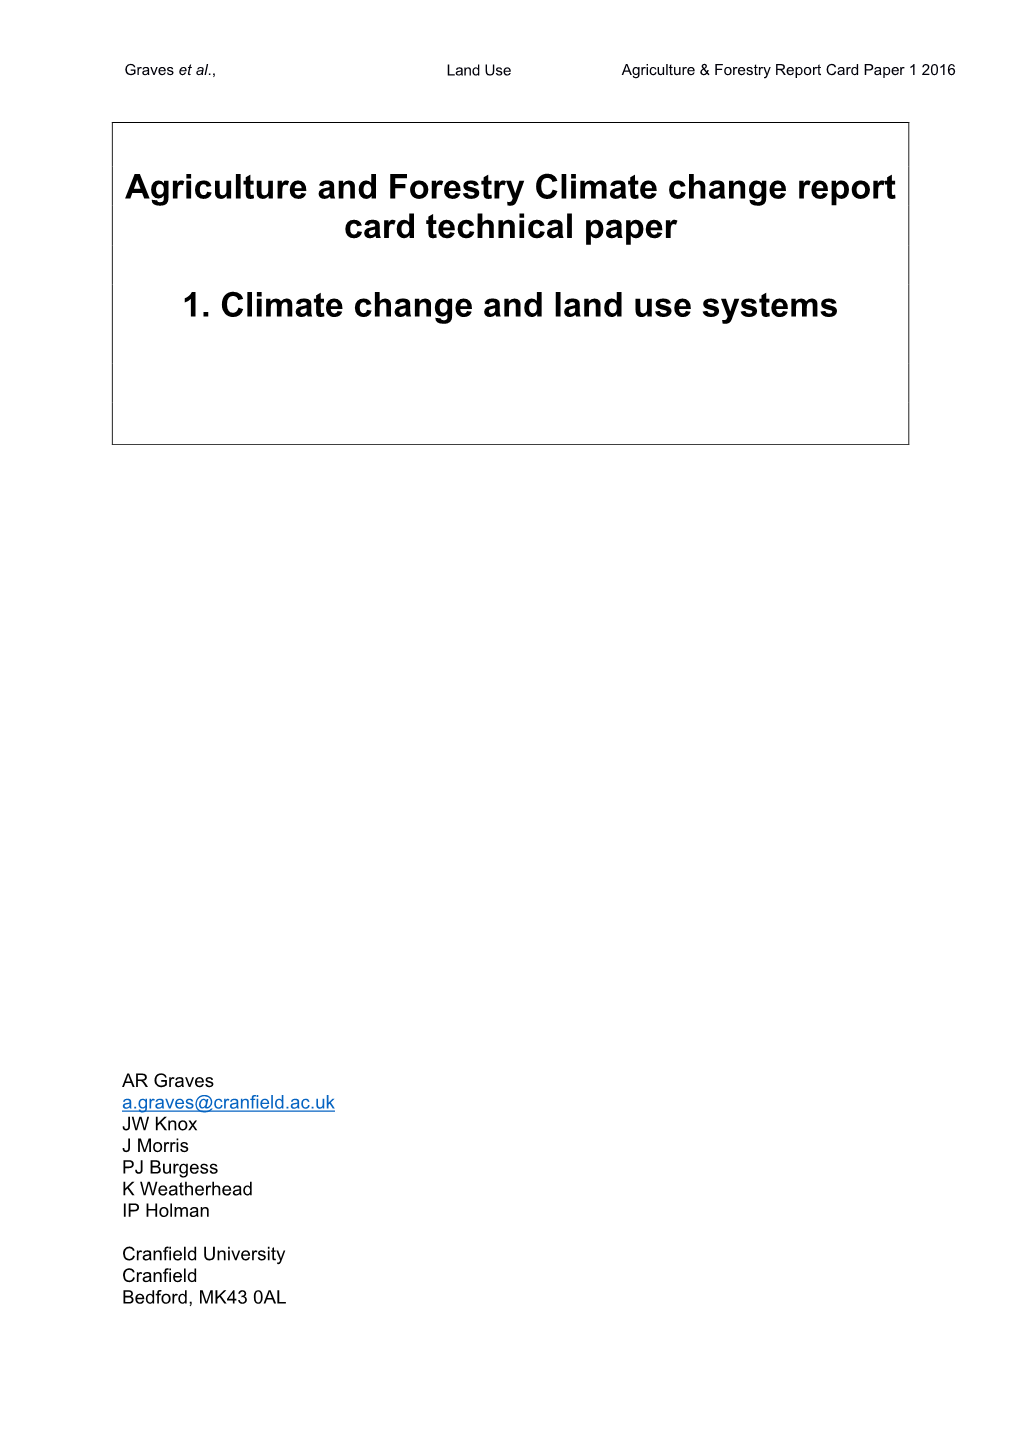 Agriculture and Forestry Climate Change Report Card Technical Paper 1. Climate Change and Land Use Systems